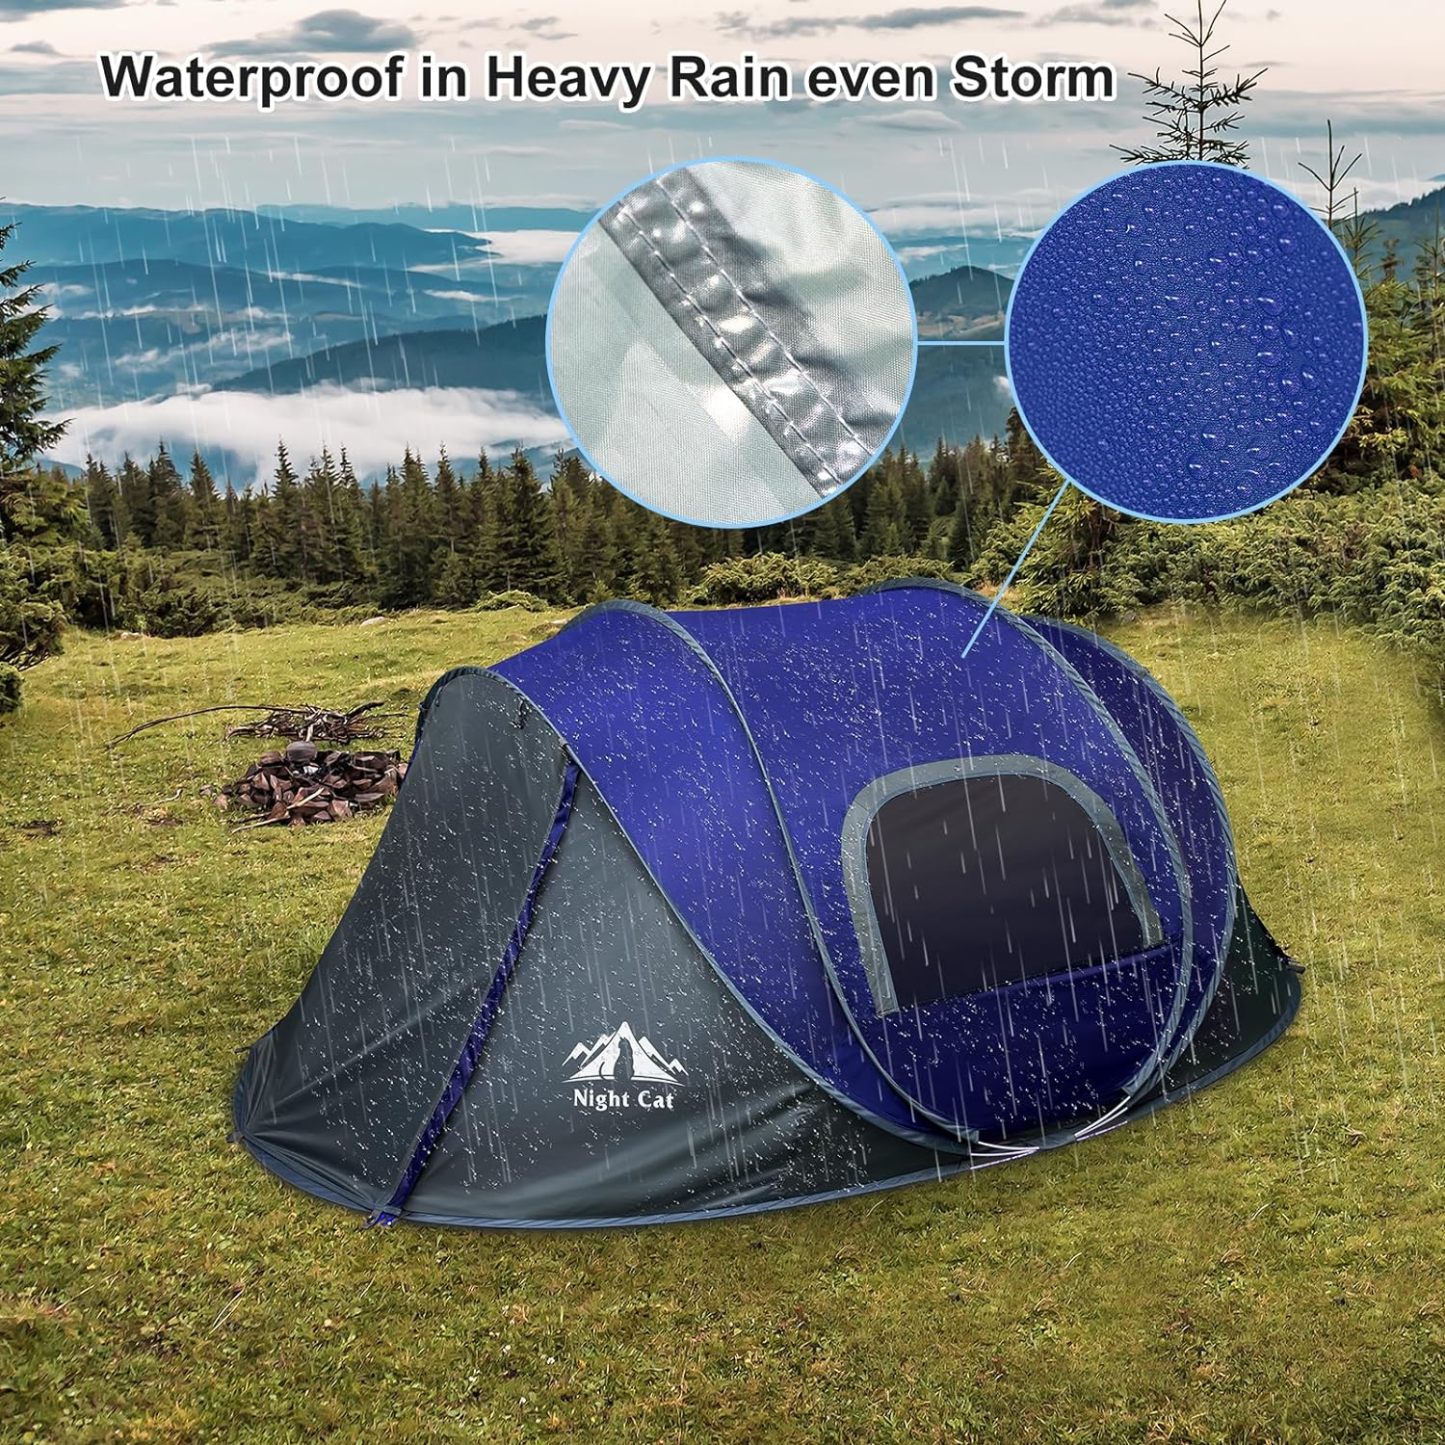 Night Cat Pop Up Tent 2 3 Person Waterproof Throwing Tent Breathable Easy Adjustment for Camping Hiking